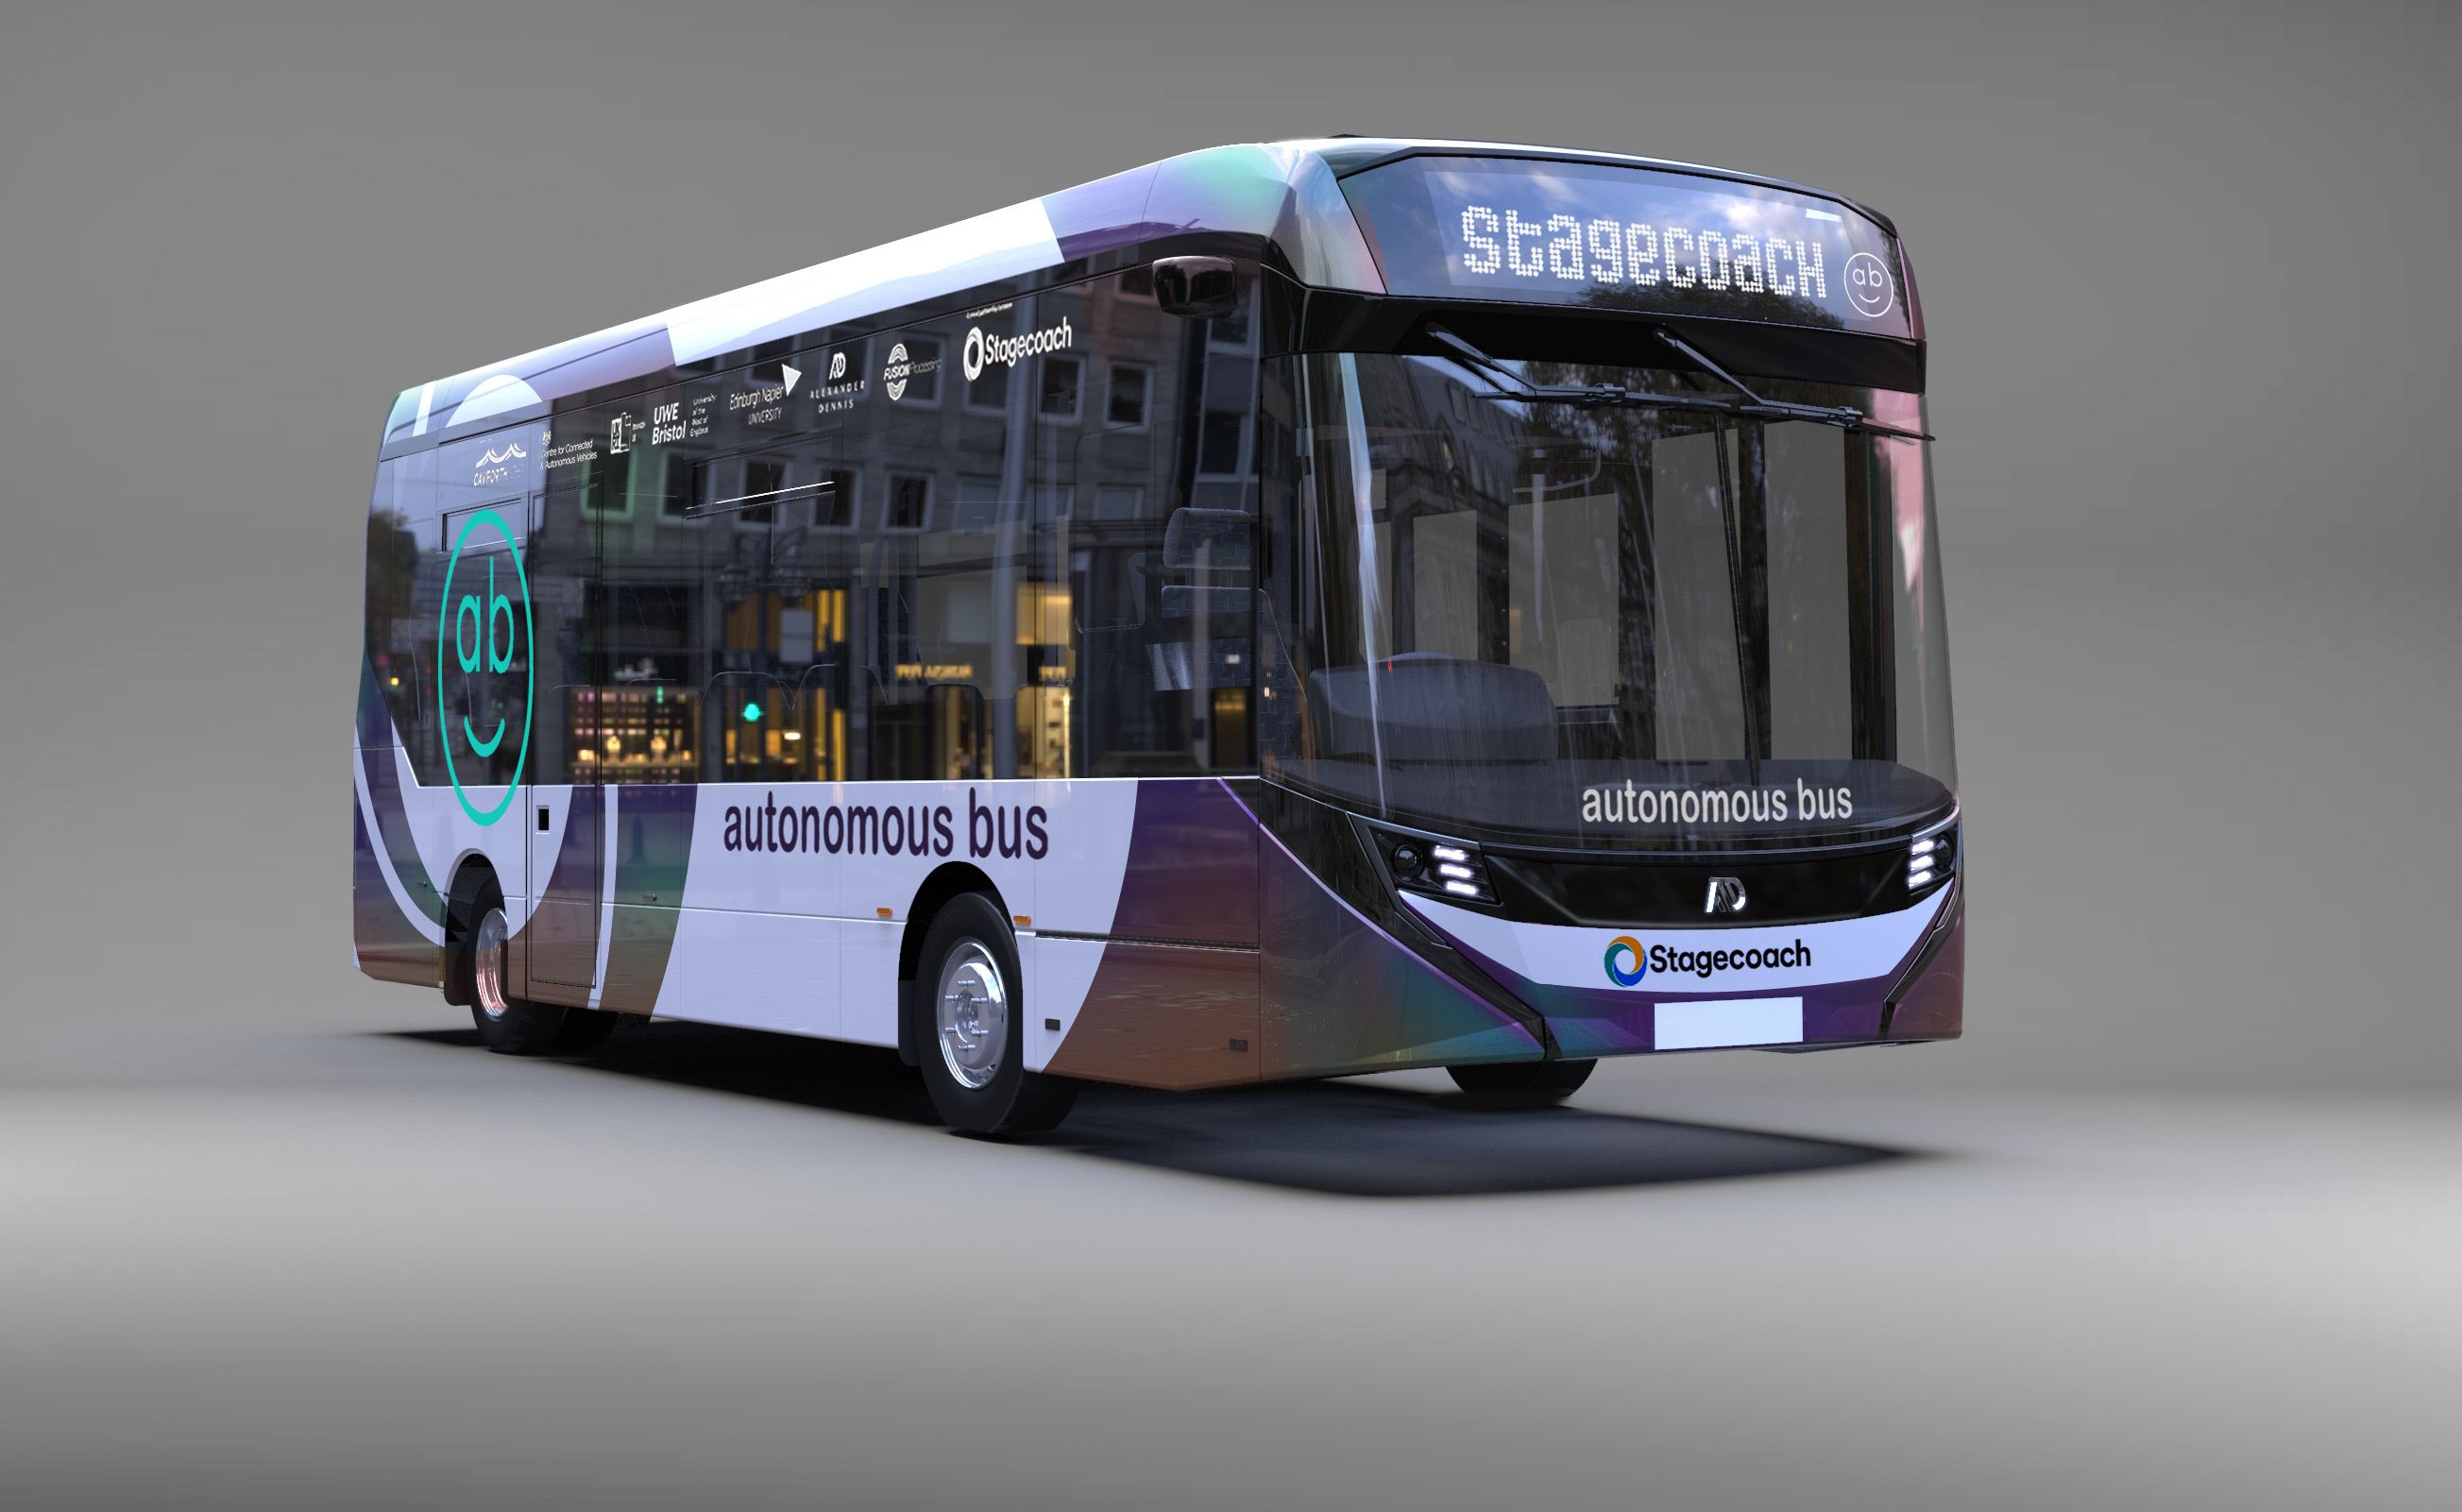 Autonomous bus trials to be expanded with £81m funding